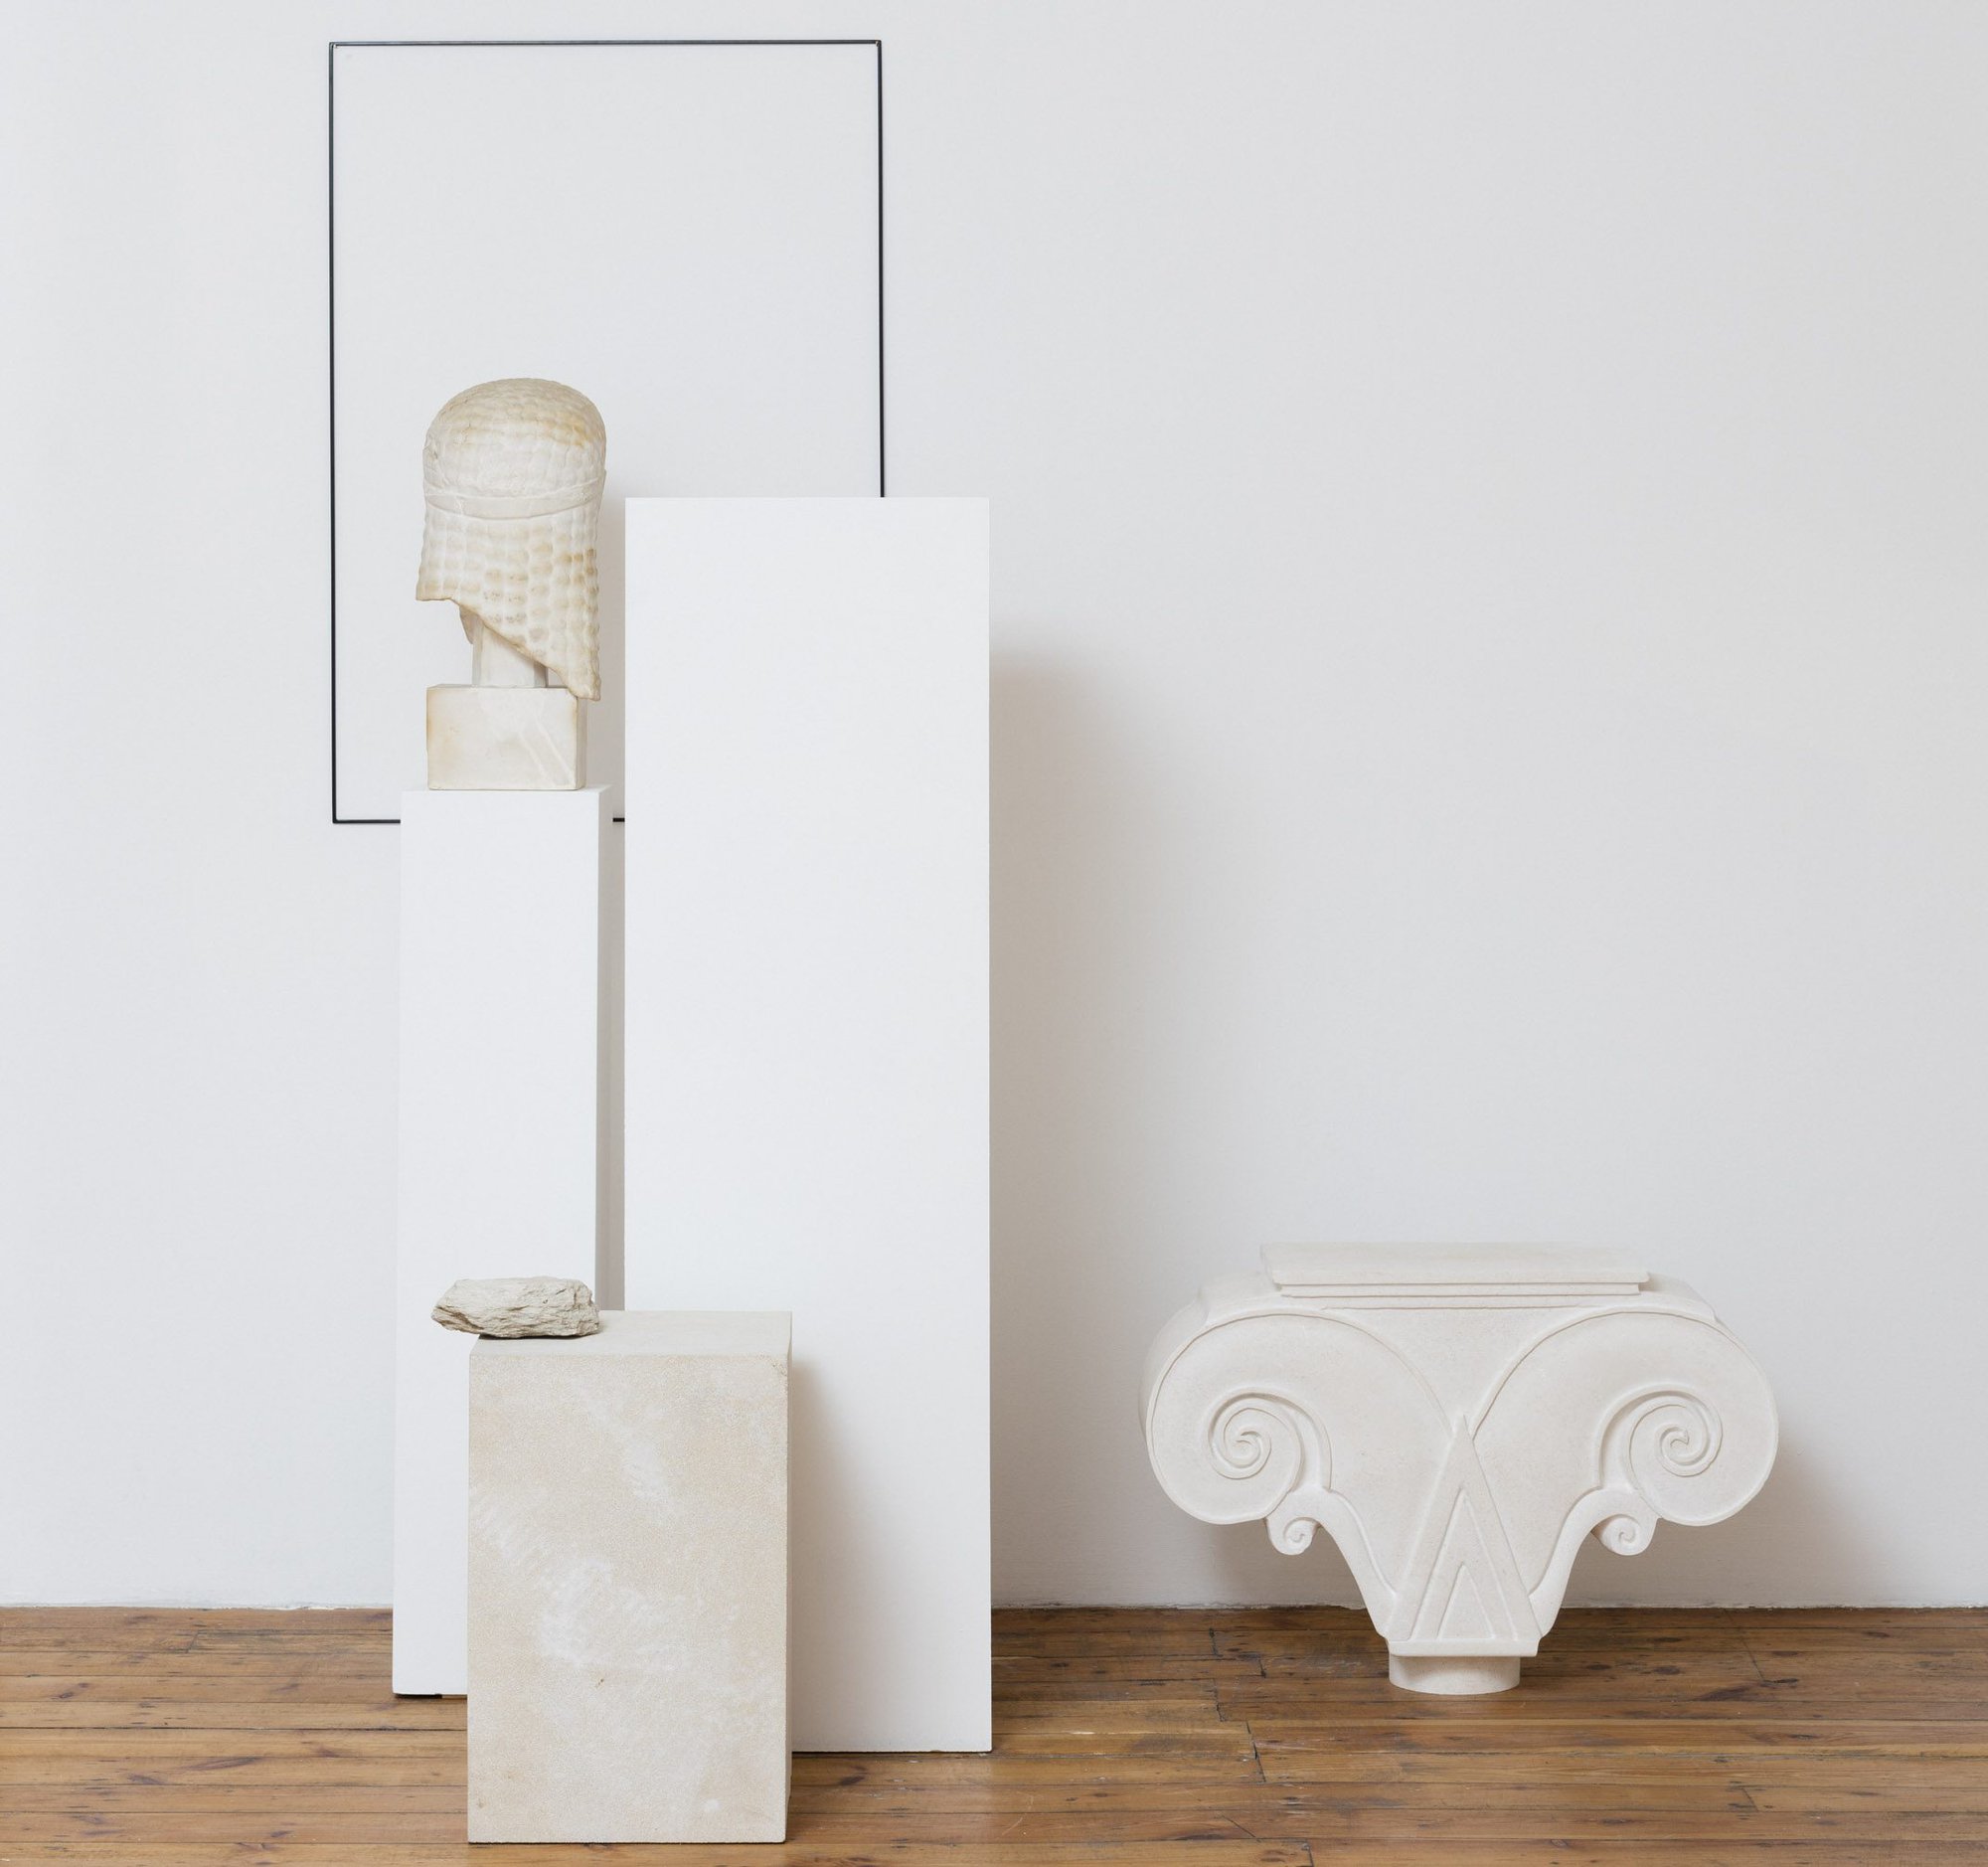 Haris Epaminonda, Untitled #05 a/w, detail, Kouros bust old museum replica in plaster, two wooden pedestals, white stone capitol, powder‐coated metal wall structure, limestone base, found stone, dimensions variable, 2016